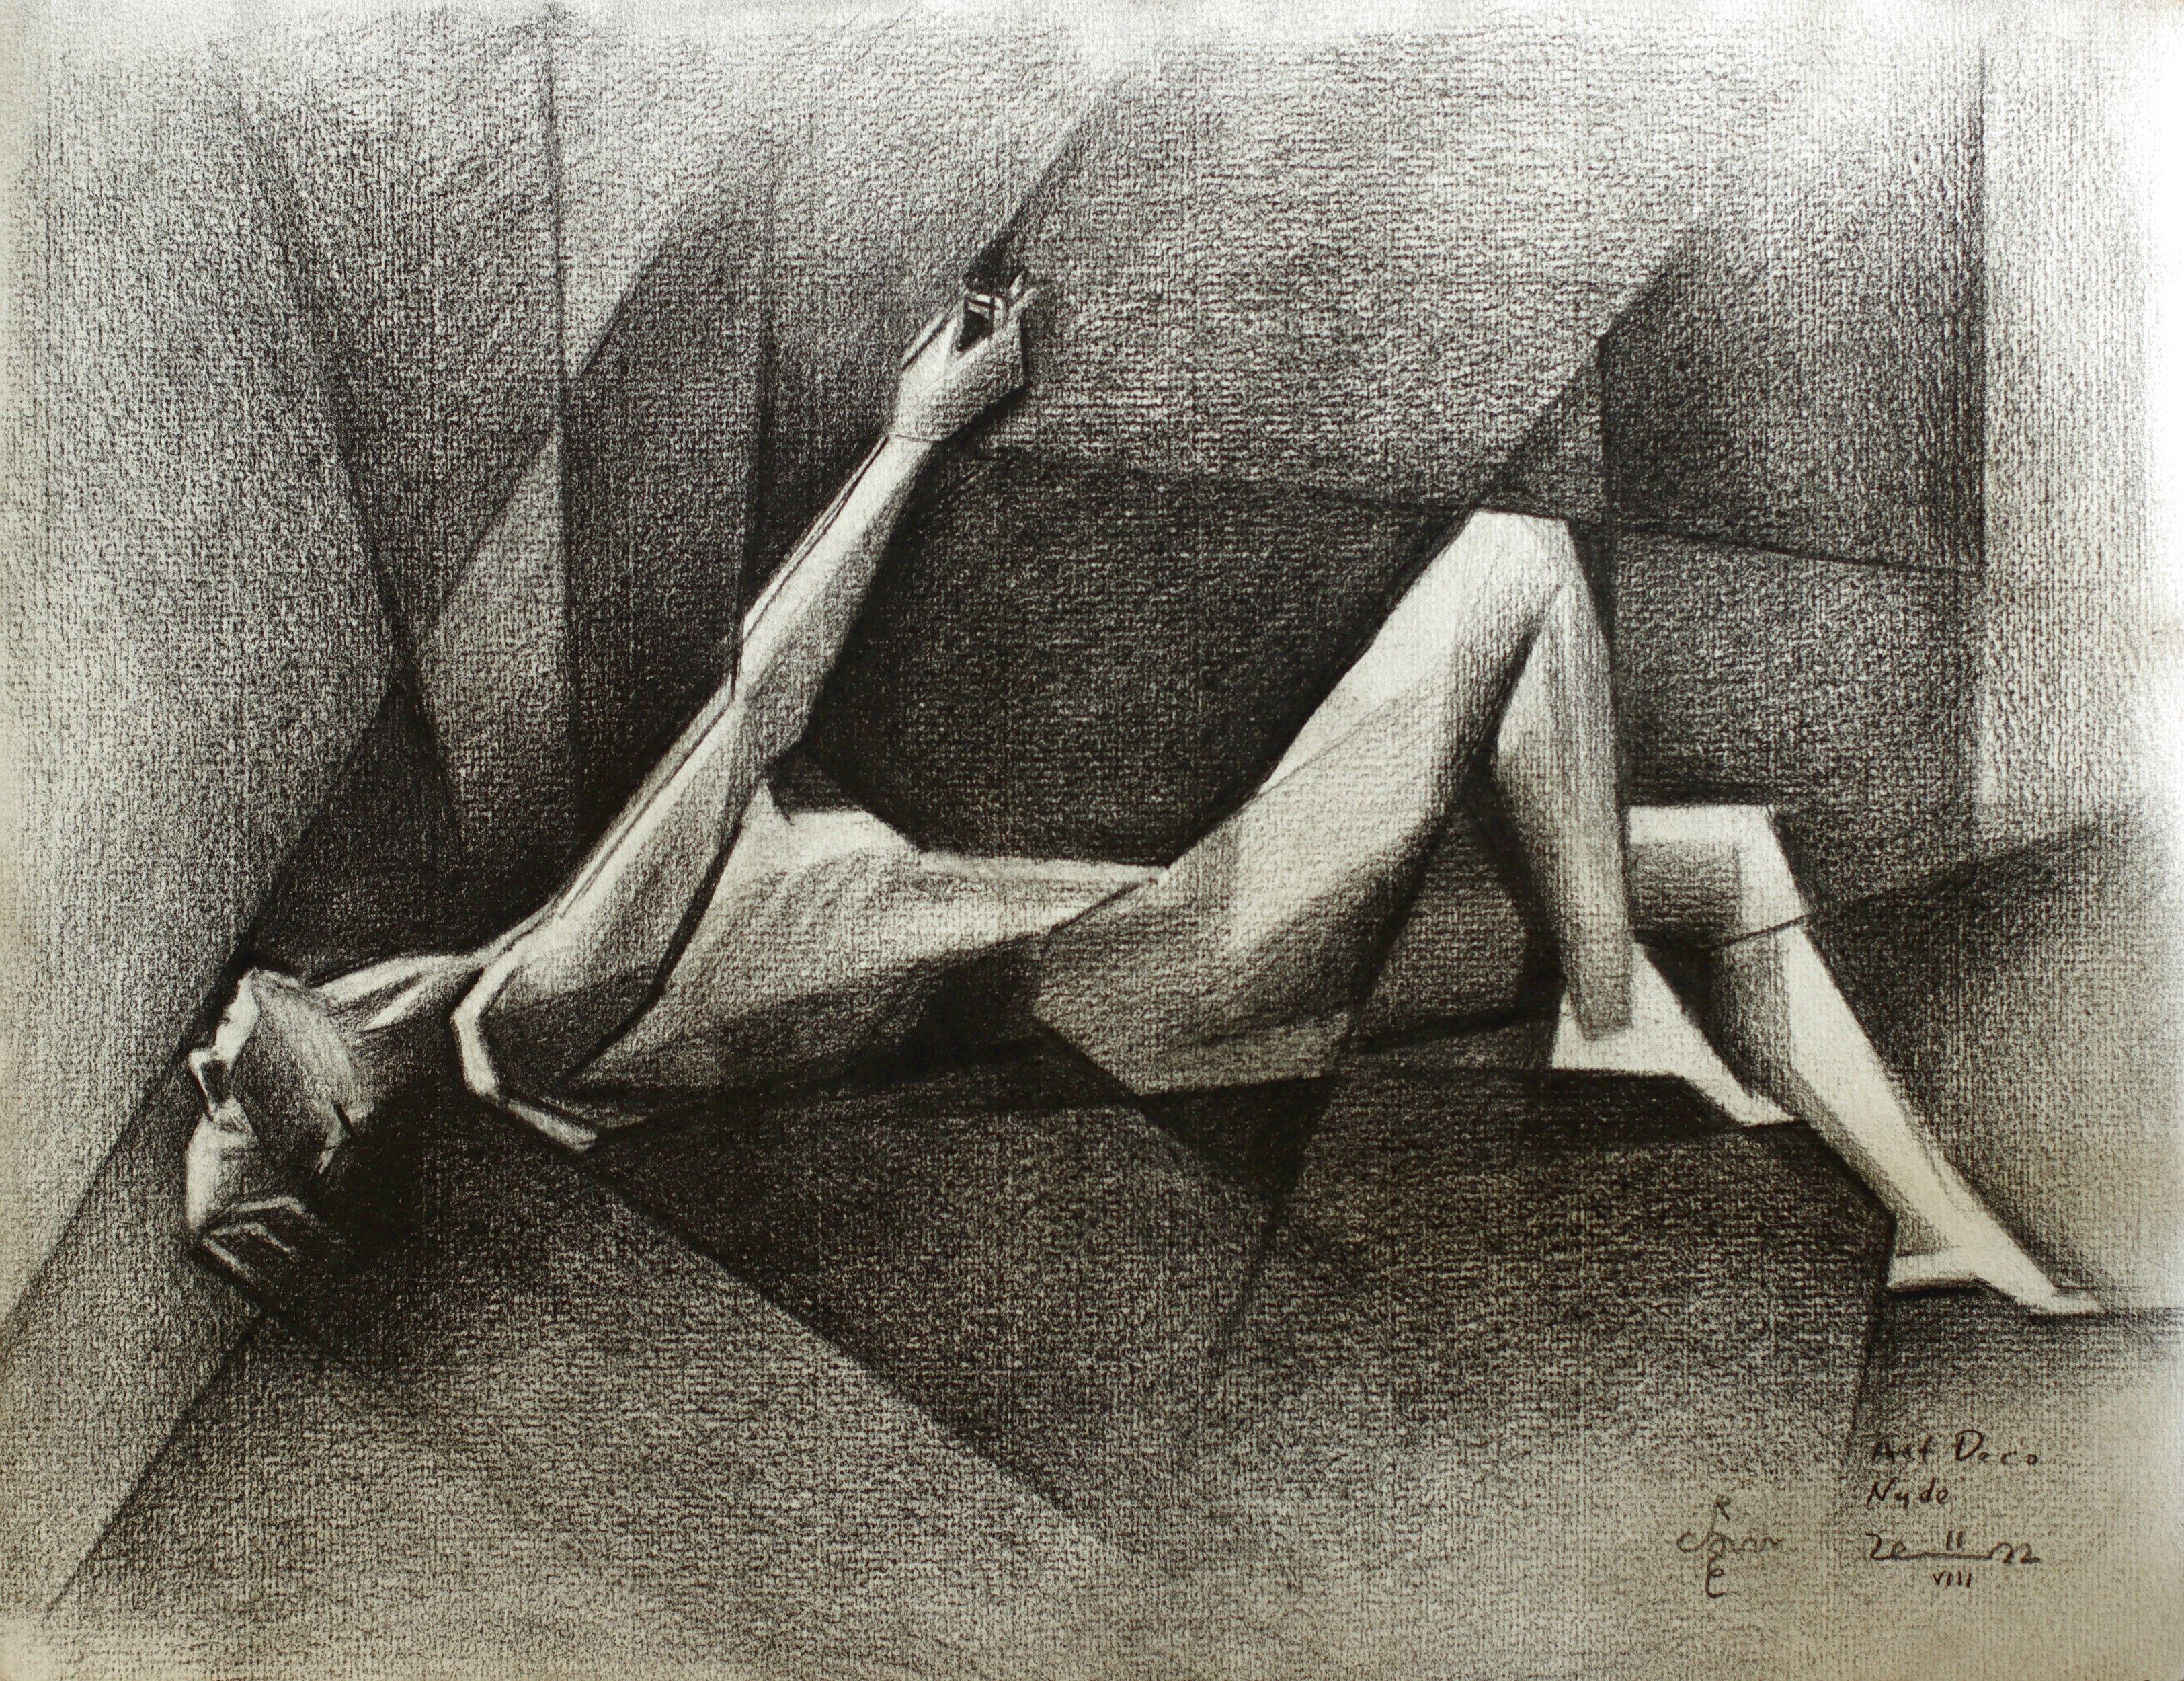 A Third One    Art Deco Nude â€“ 11 -08-22 is my third graphite pencil drawing done with my Faber-Castell Pitt Graphite Matt pencils. A couple of days after the second but I had a busy schedule of meetings, uploading and painting of course. I had a